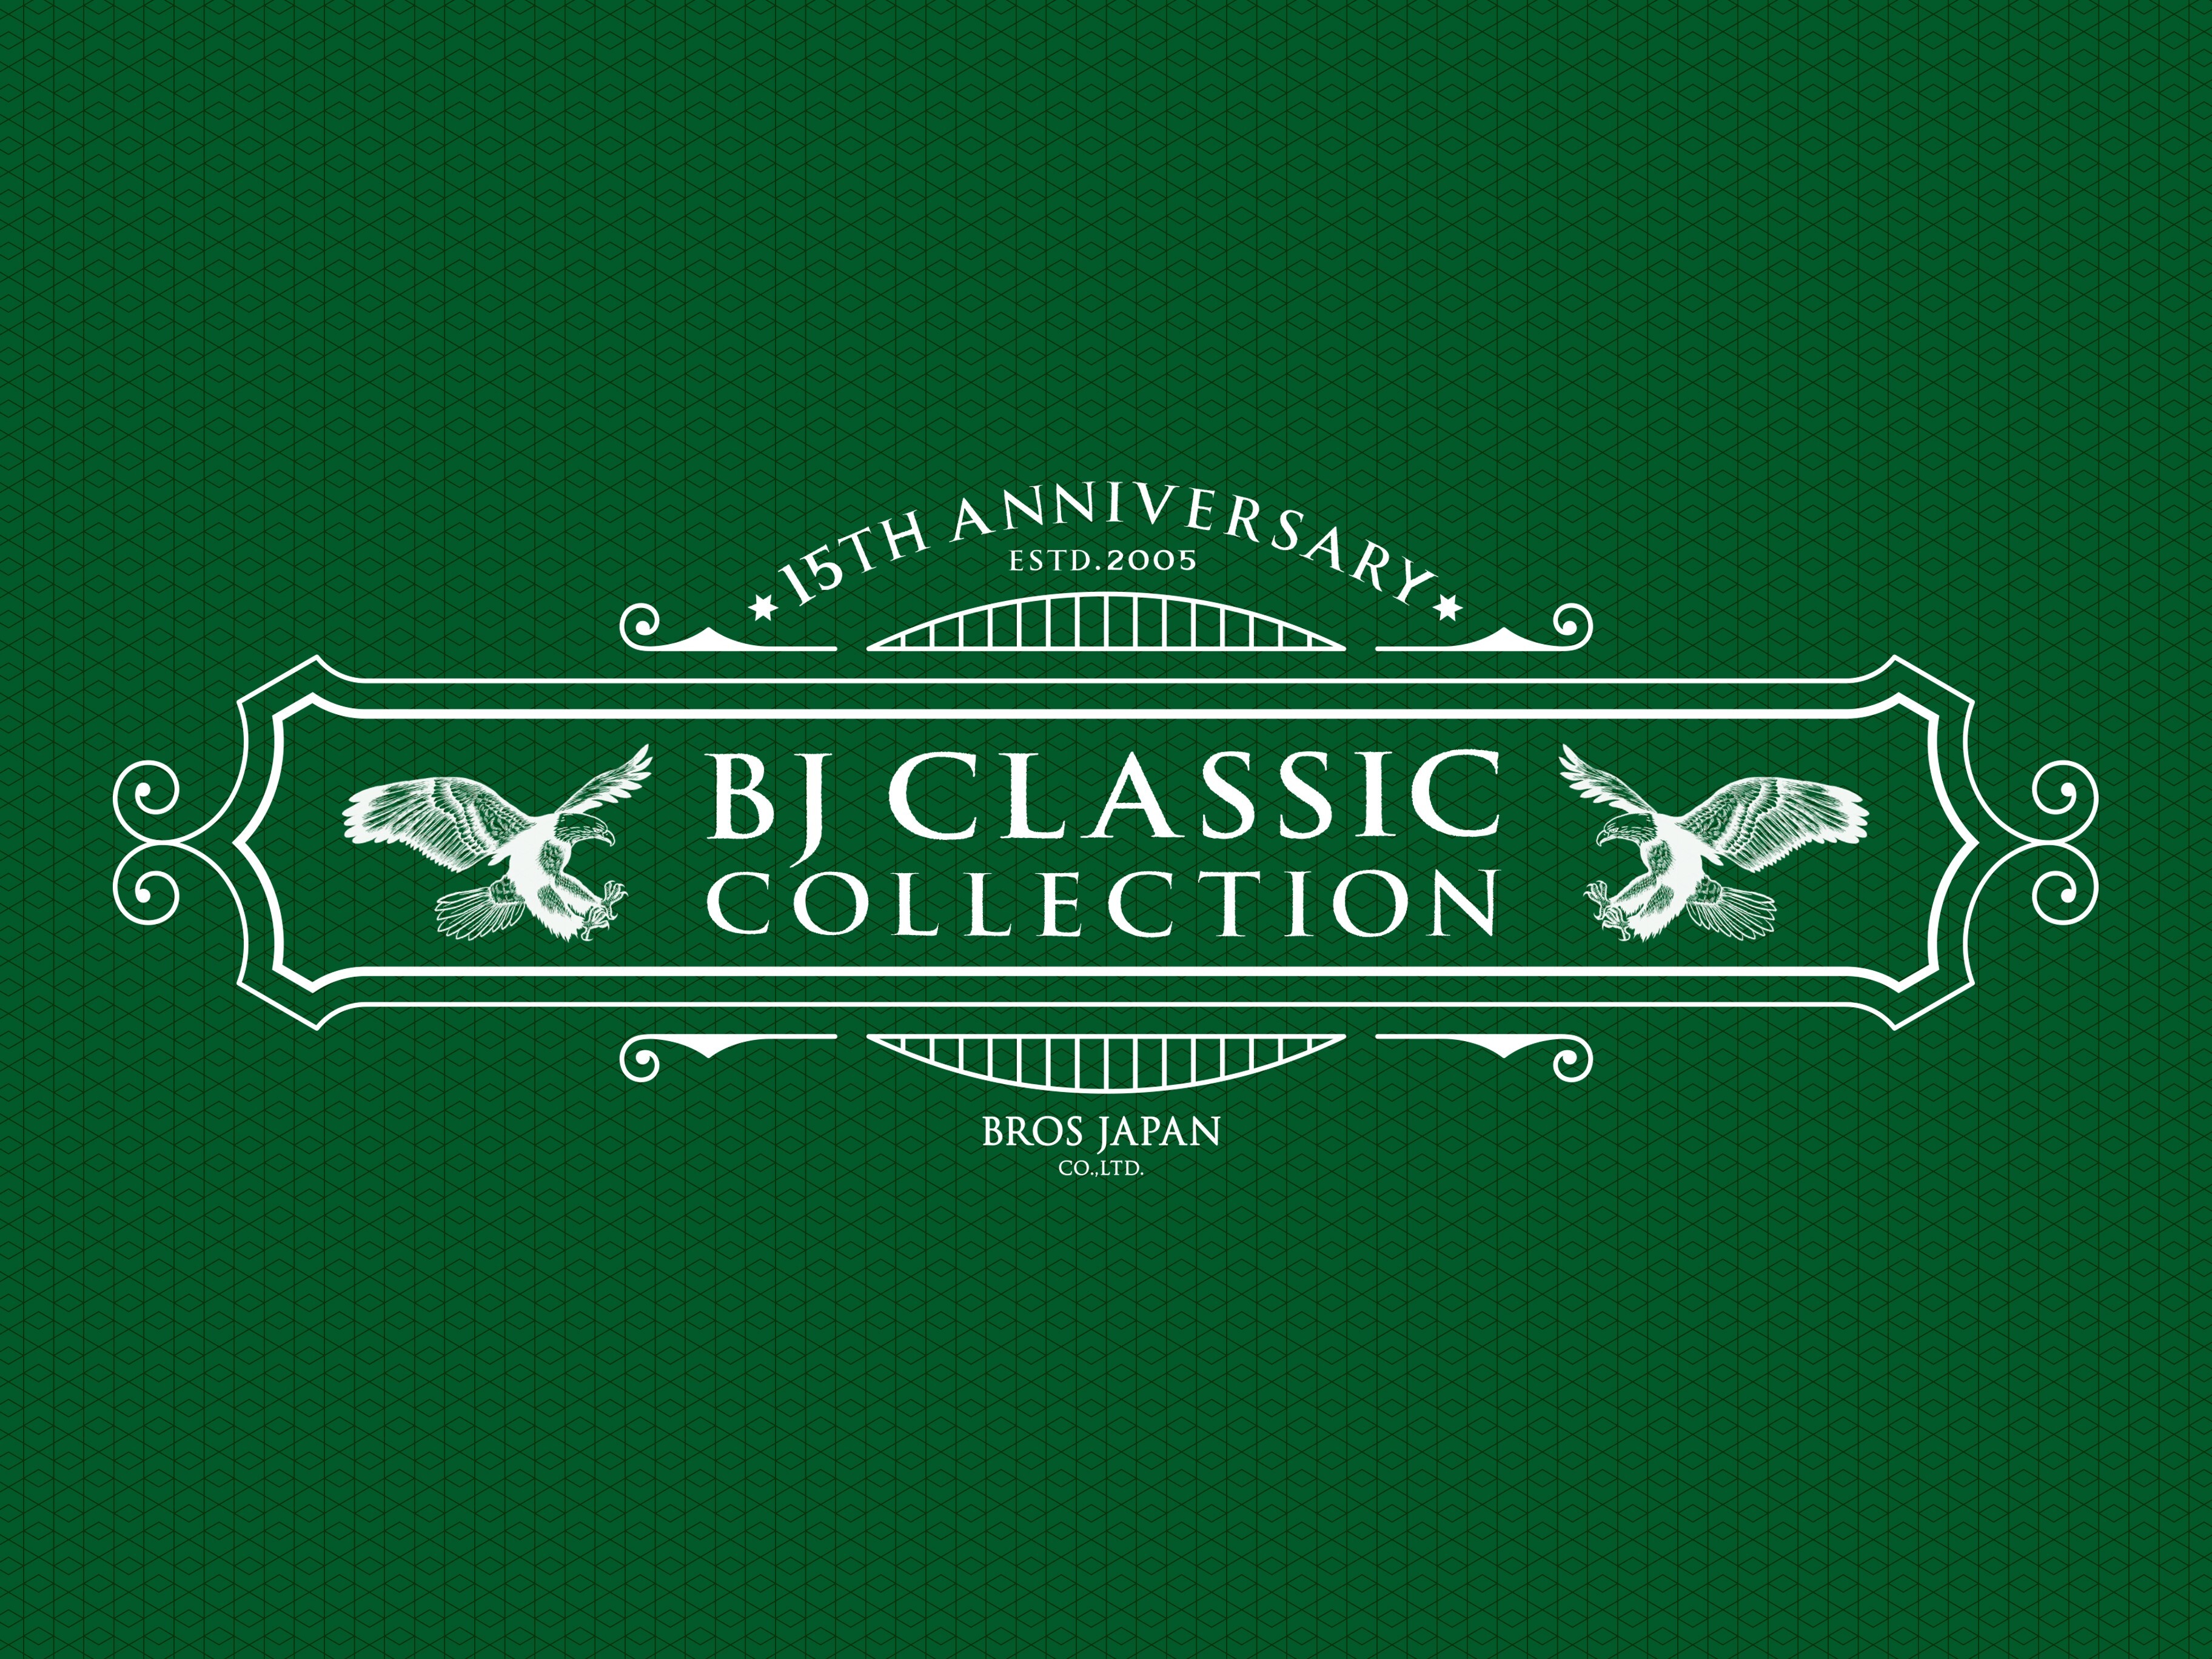 BJ CLASSIC COLLECTION 15周年記念モデル